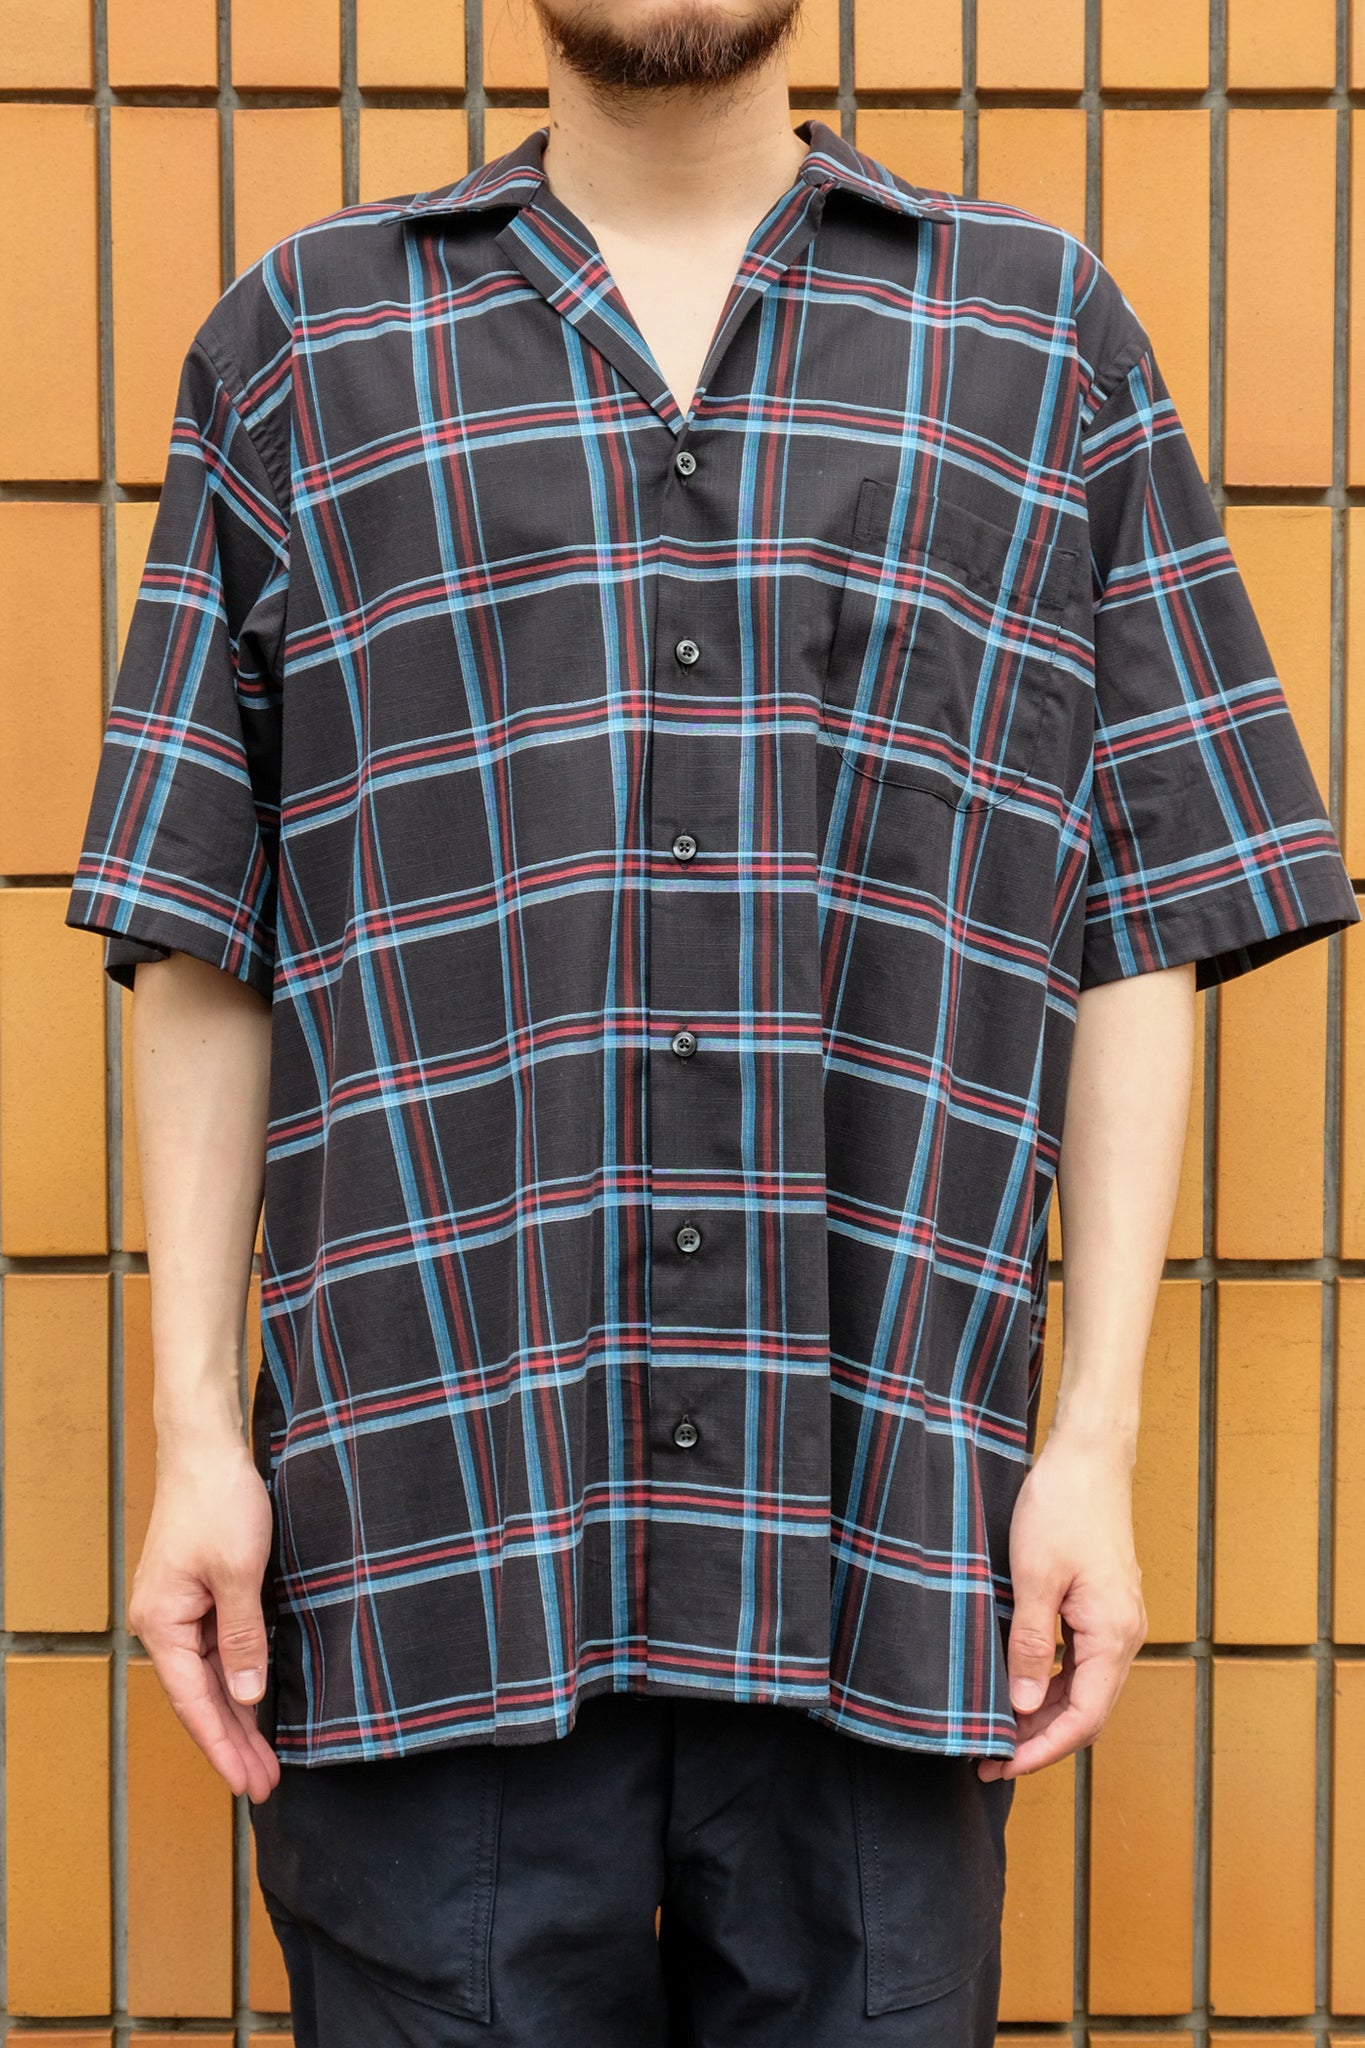 INDIVIDUALIZED SHIRTS "【LOCALERS EXCLUSIVE】SUMMER PLAID SHORT SLEEVE SHIRT"